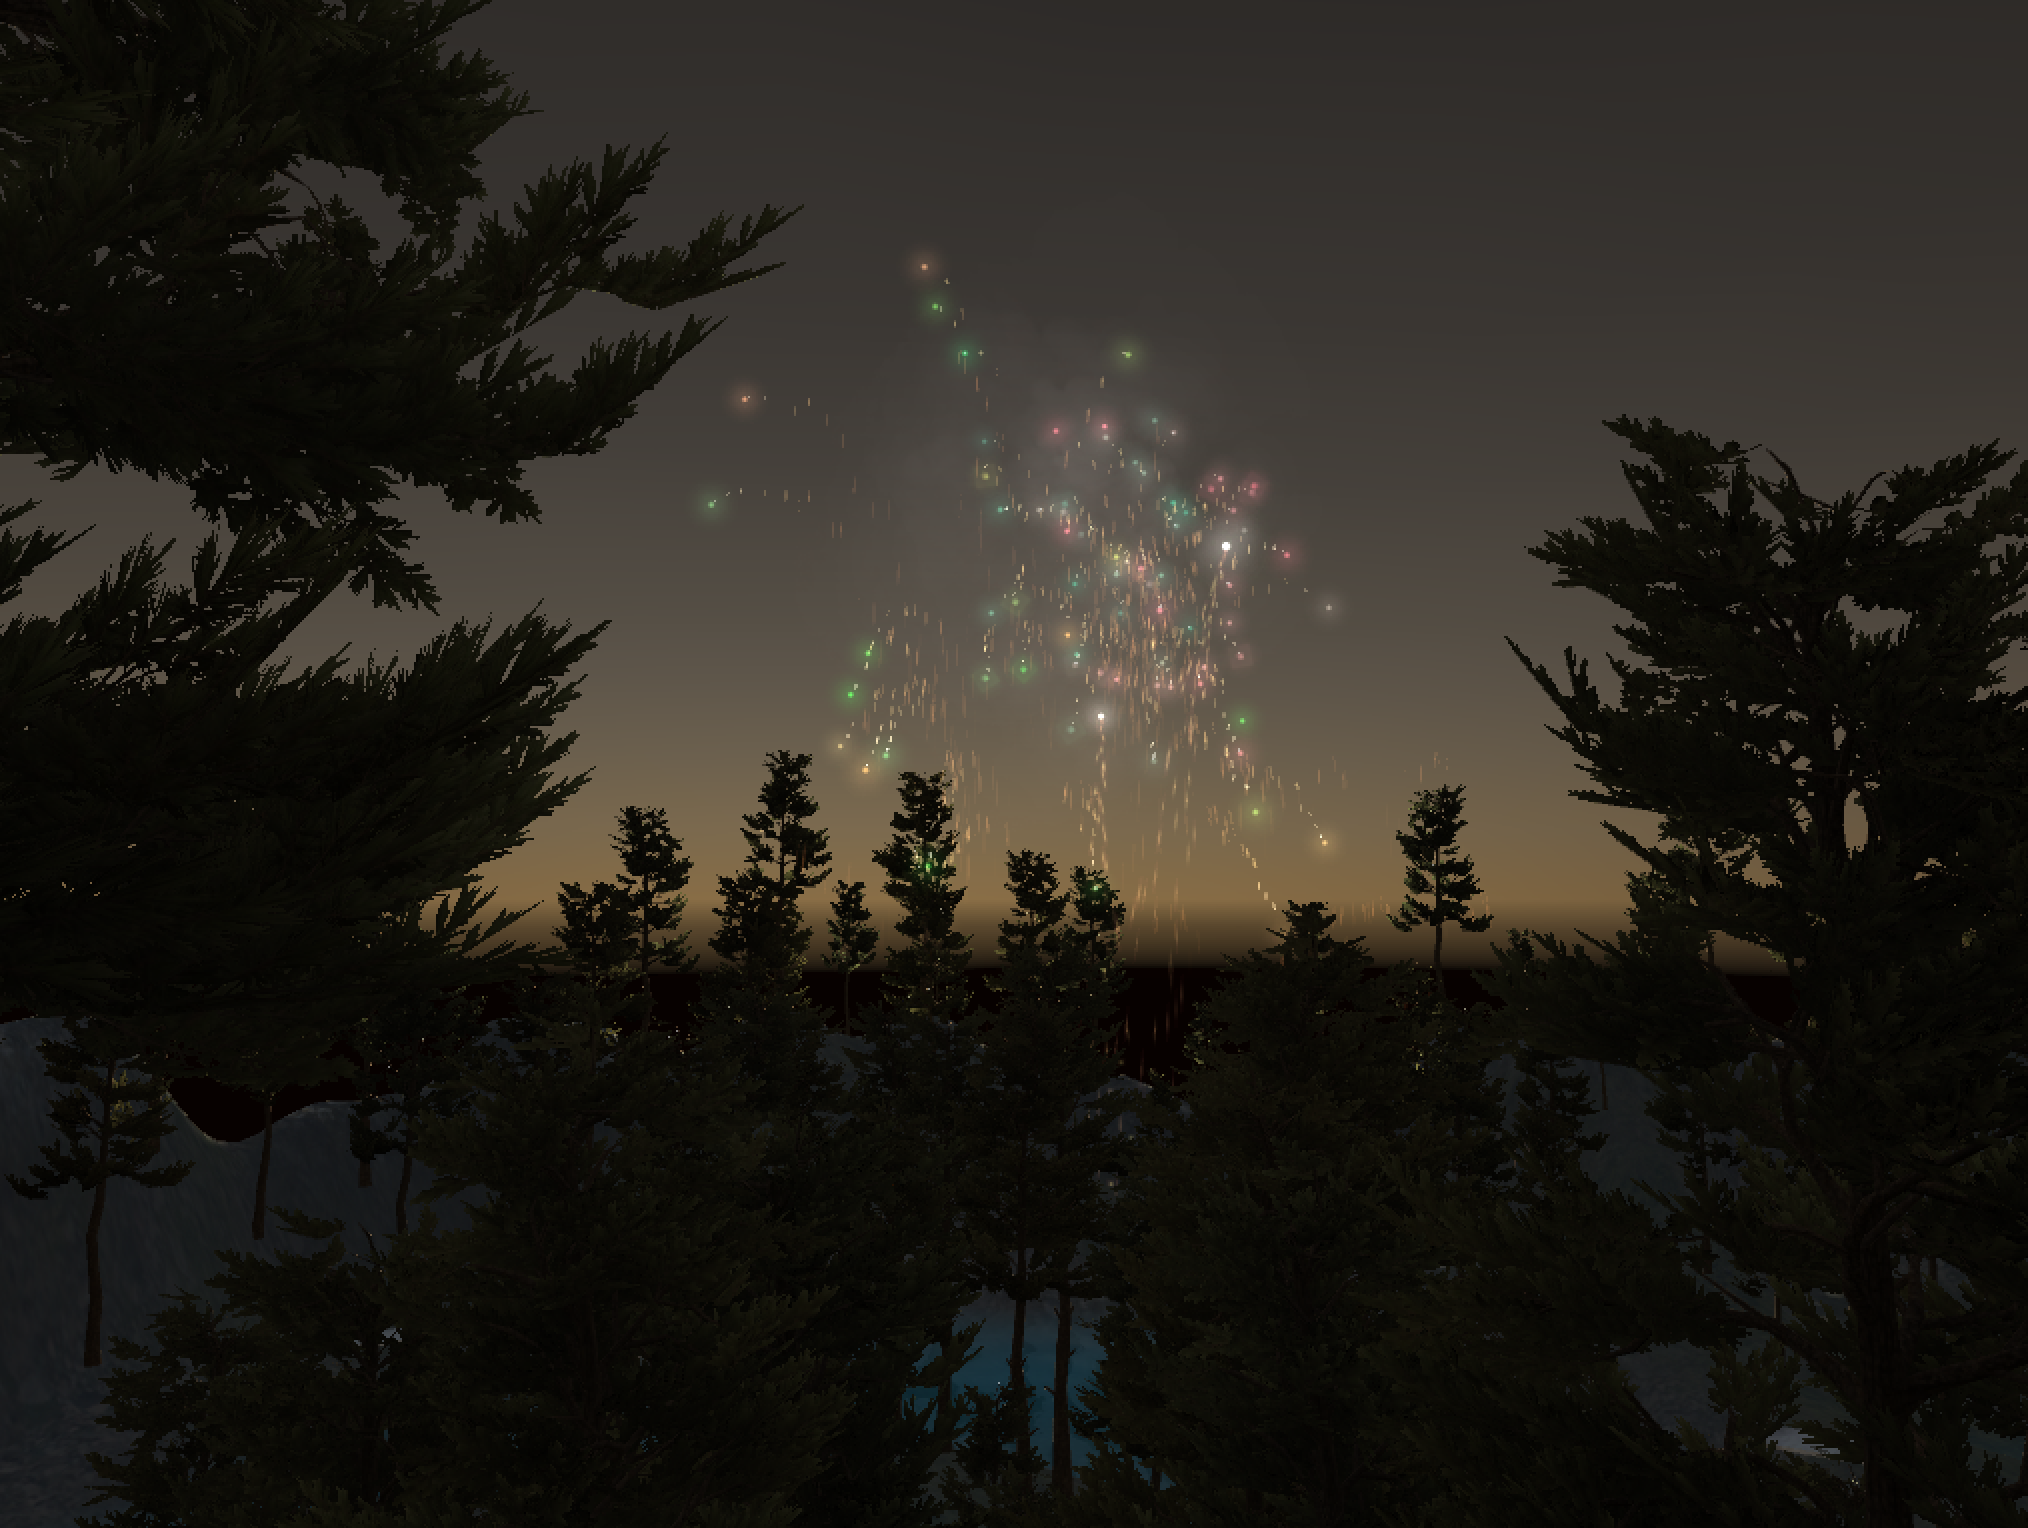  A fireworks celebration at the end of the level!&nbsp;   In-game screenshot  